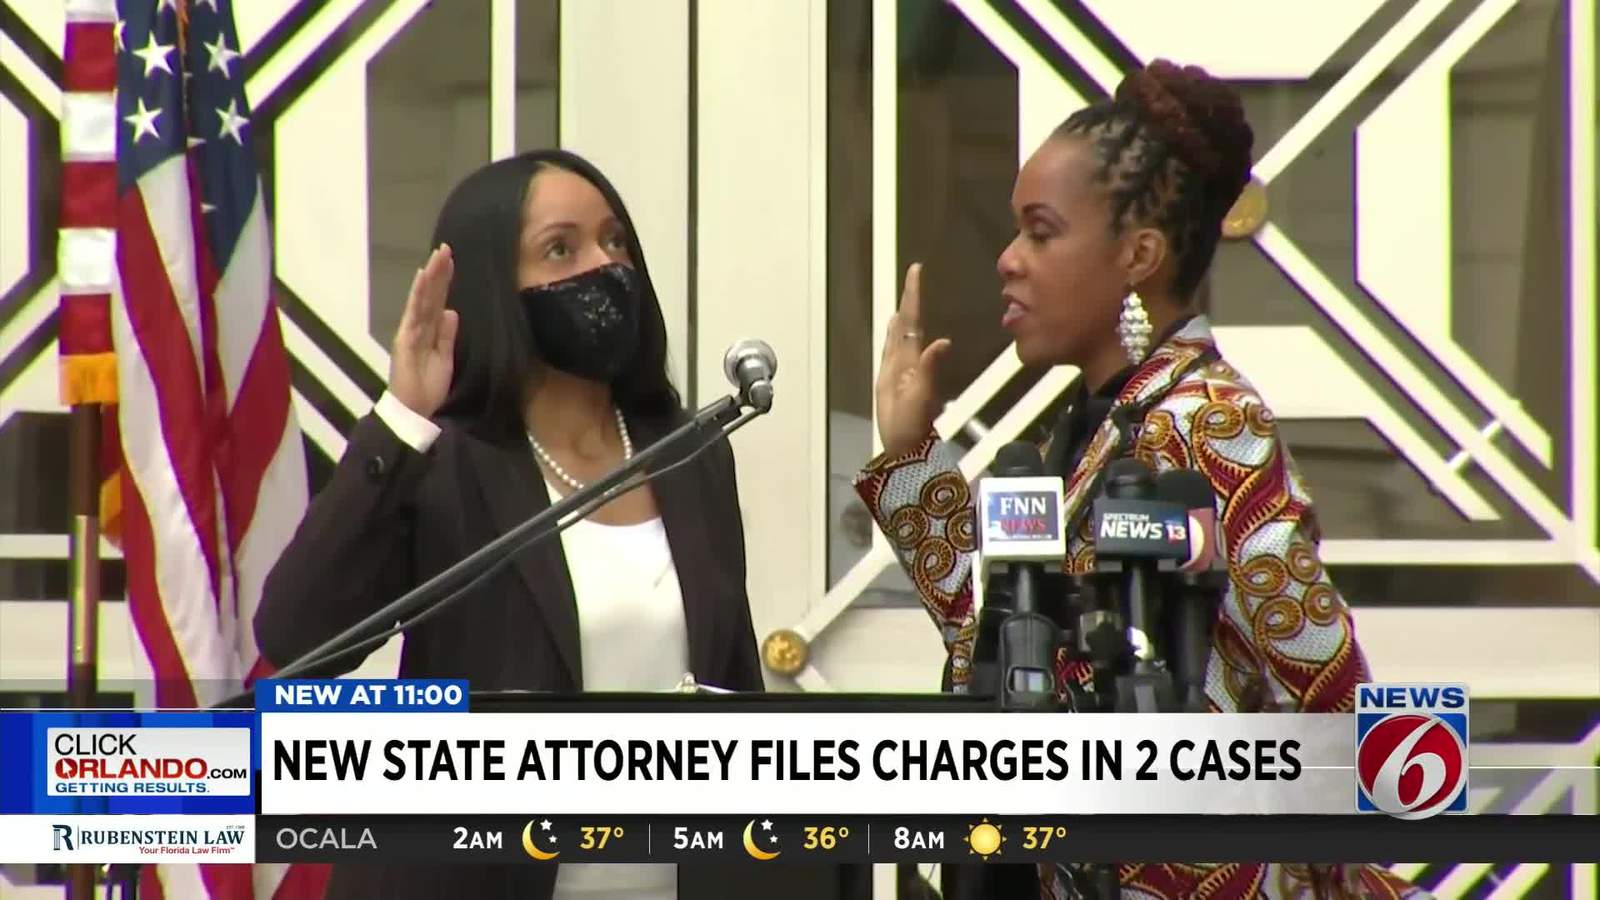 New State Attorney files charges in high-profile cases